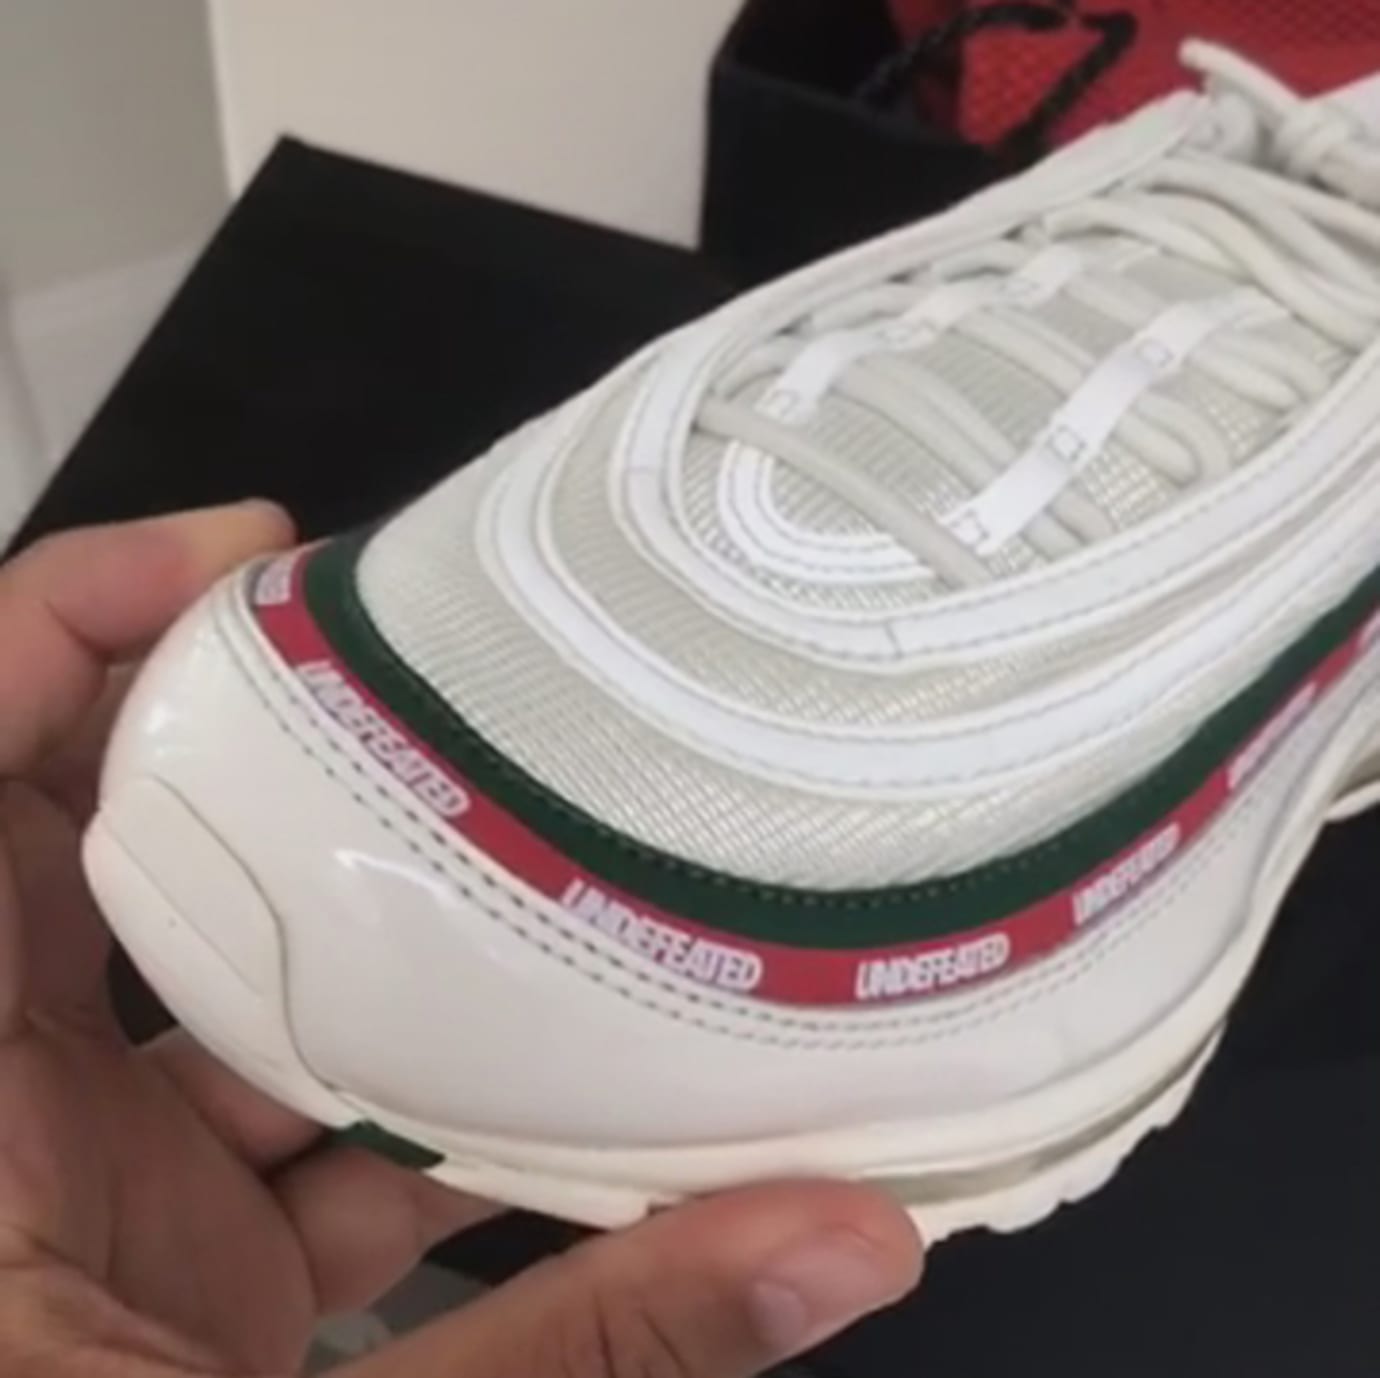 Undefeated Nike Air Max 97 Sail White Green Red AJ1986-100 Collector